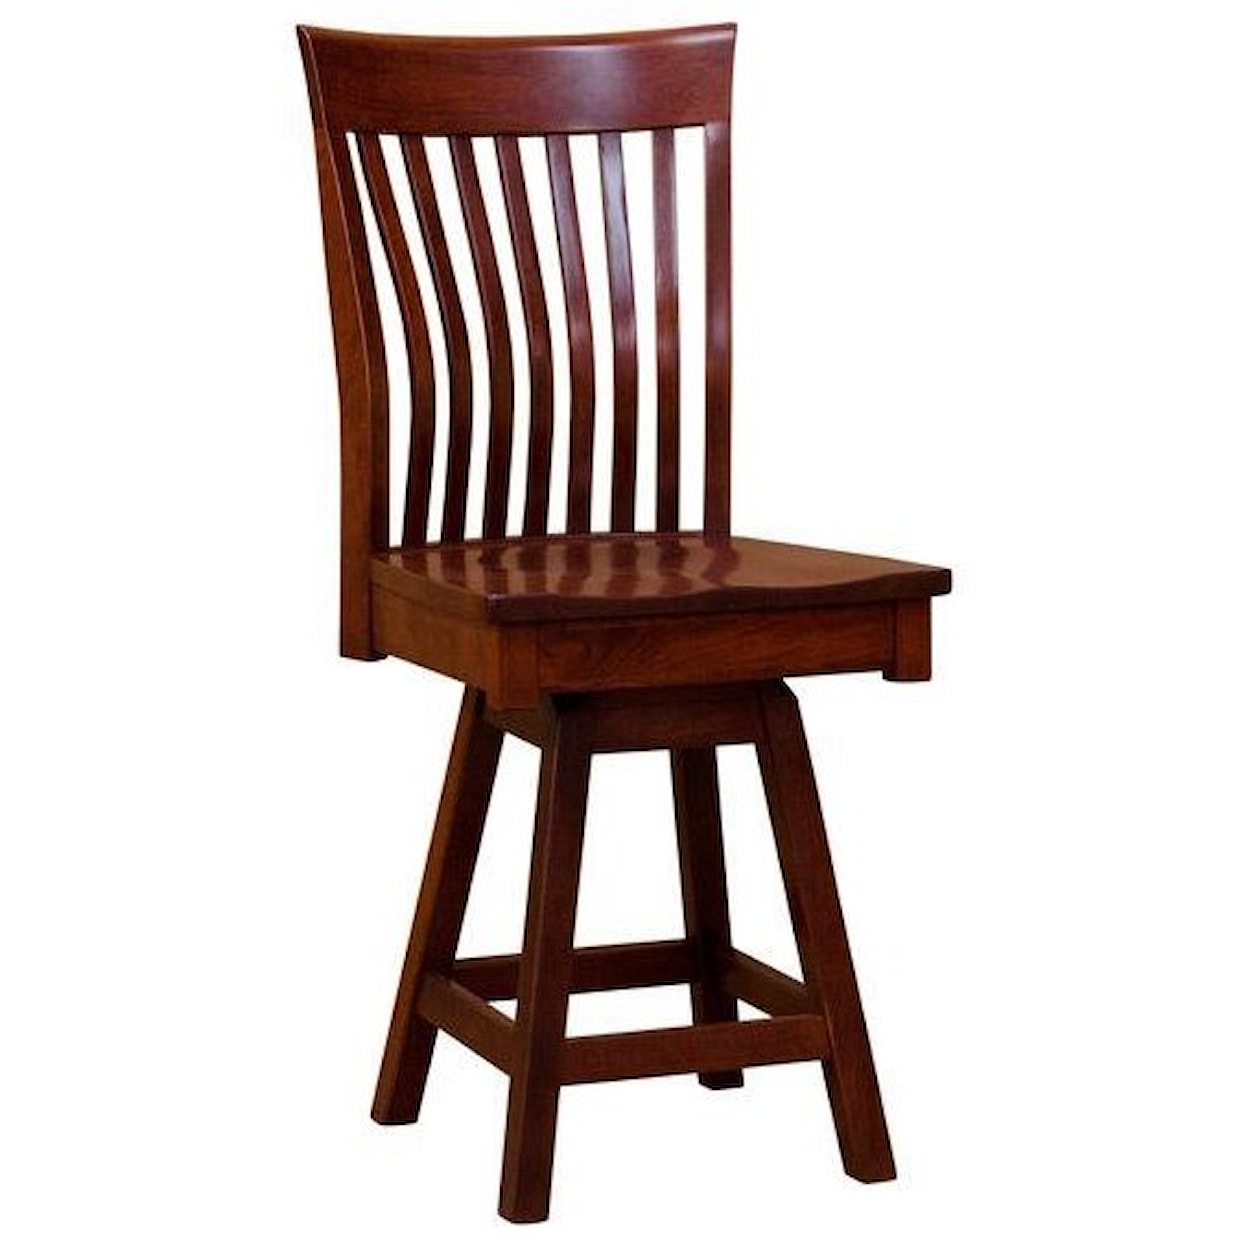 Country Comfort Woodworking Ashley 24" Swivel Stool